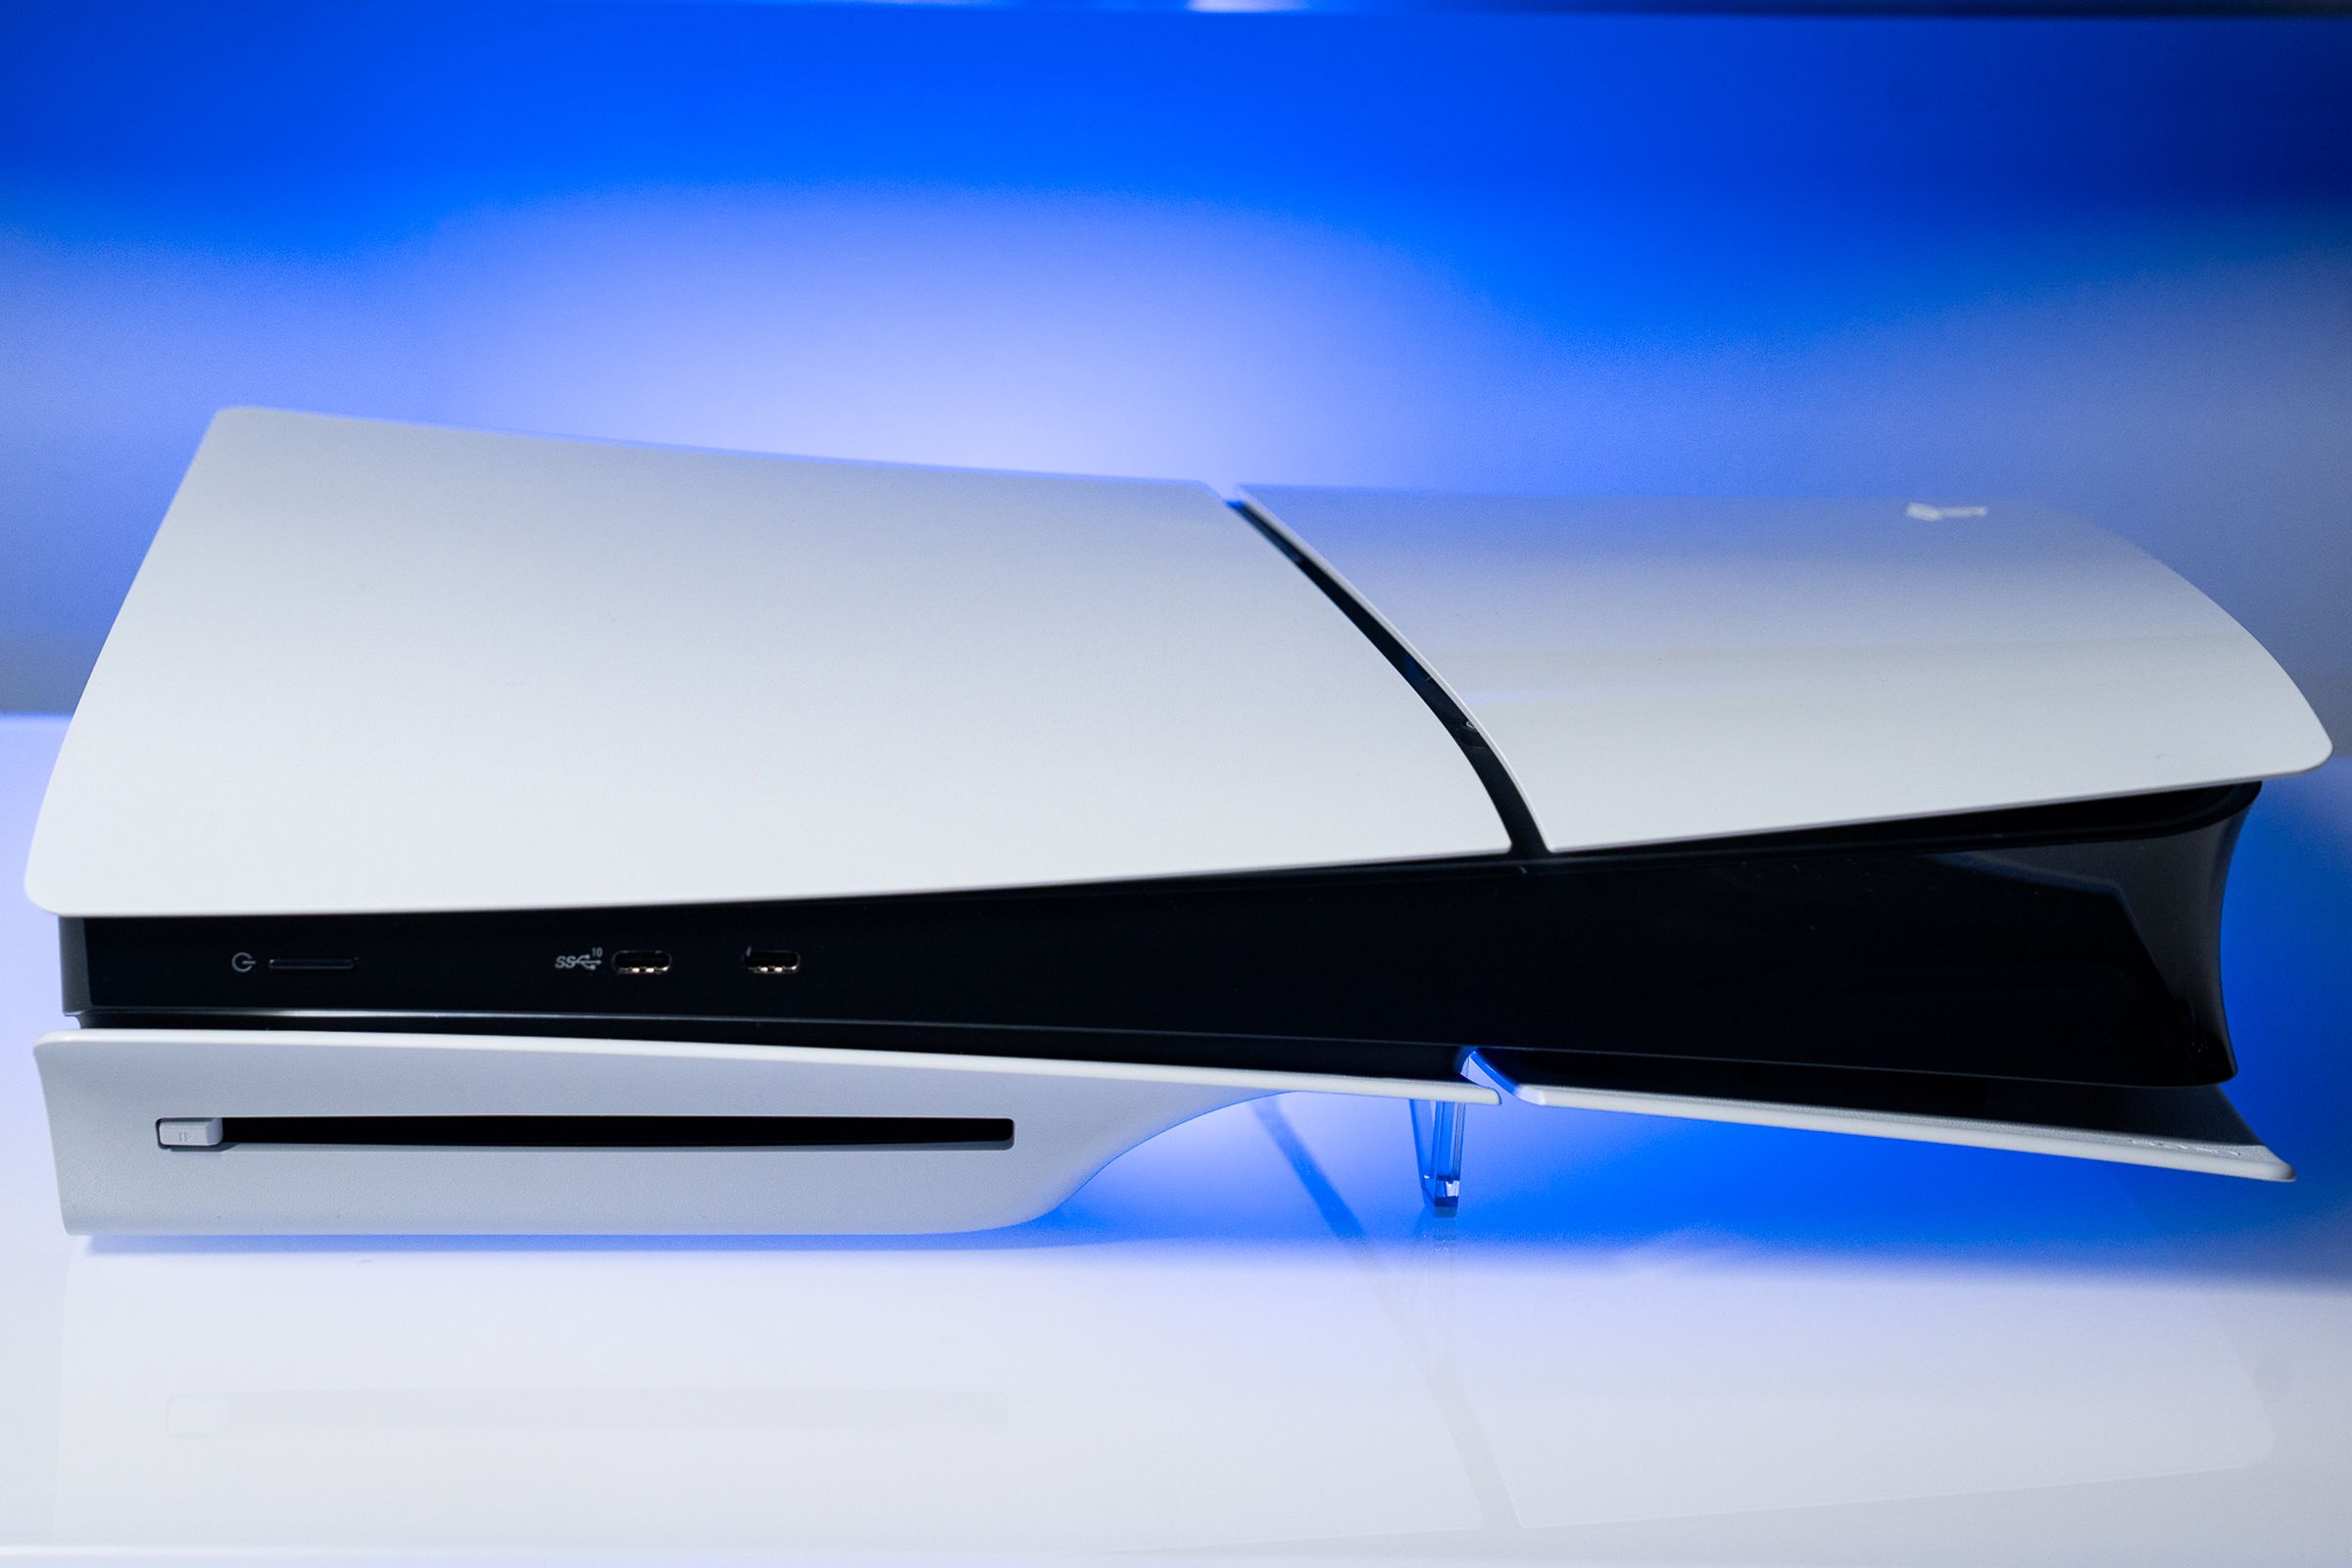 The PlayStation 5 slim sitting on a white surface with a blue backlight.